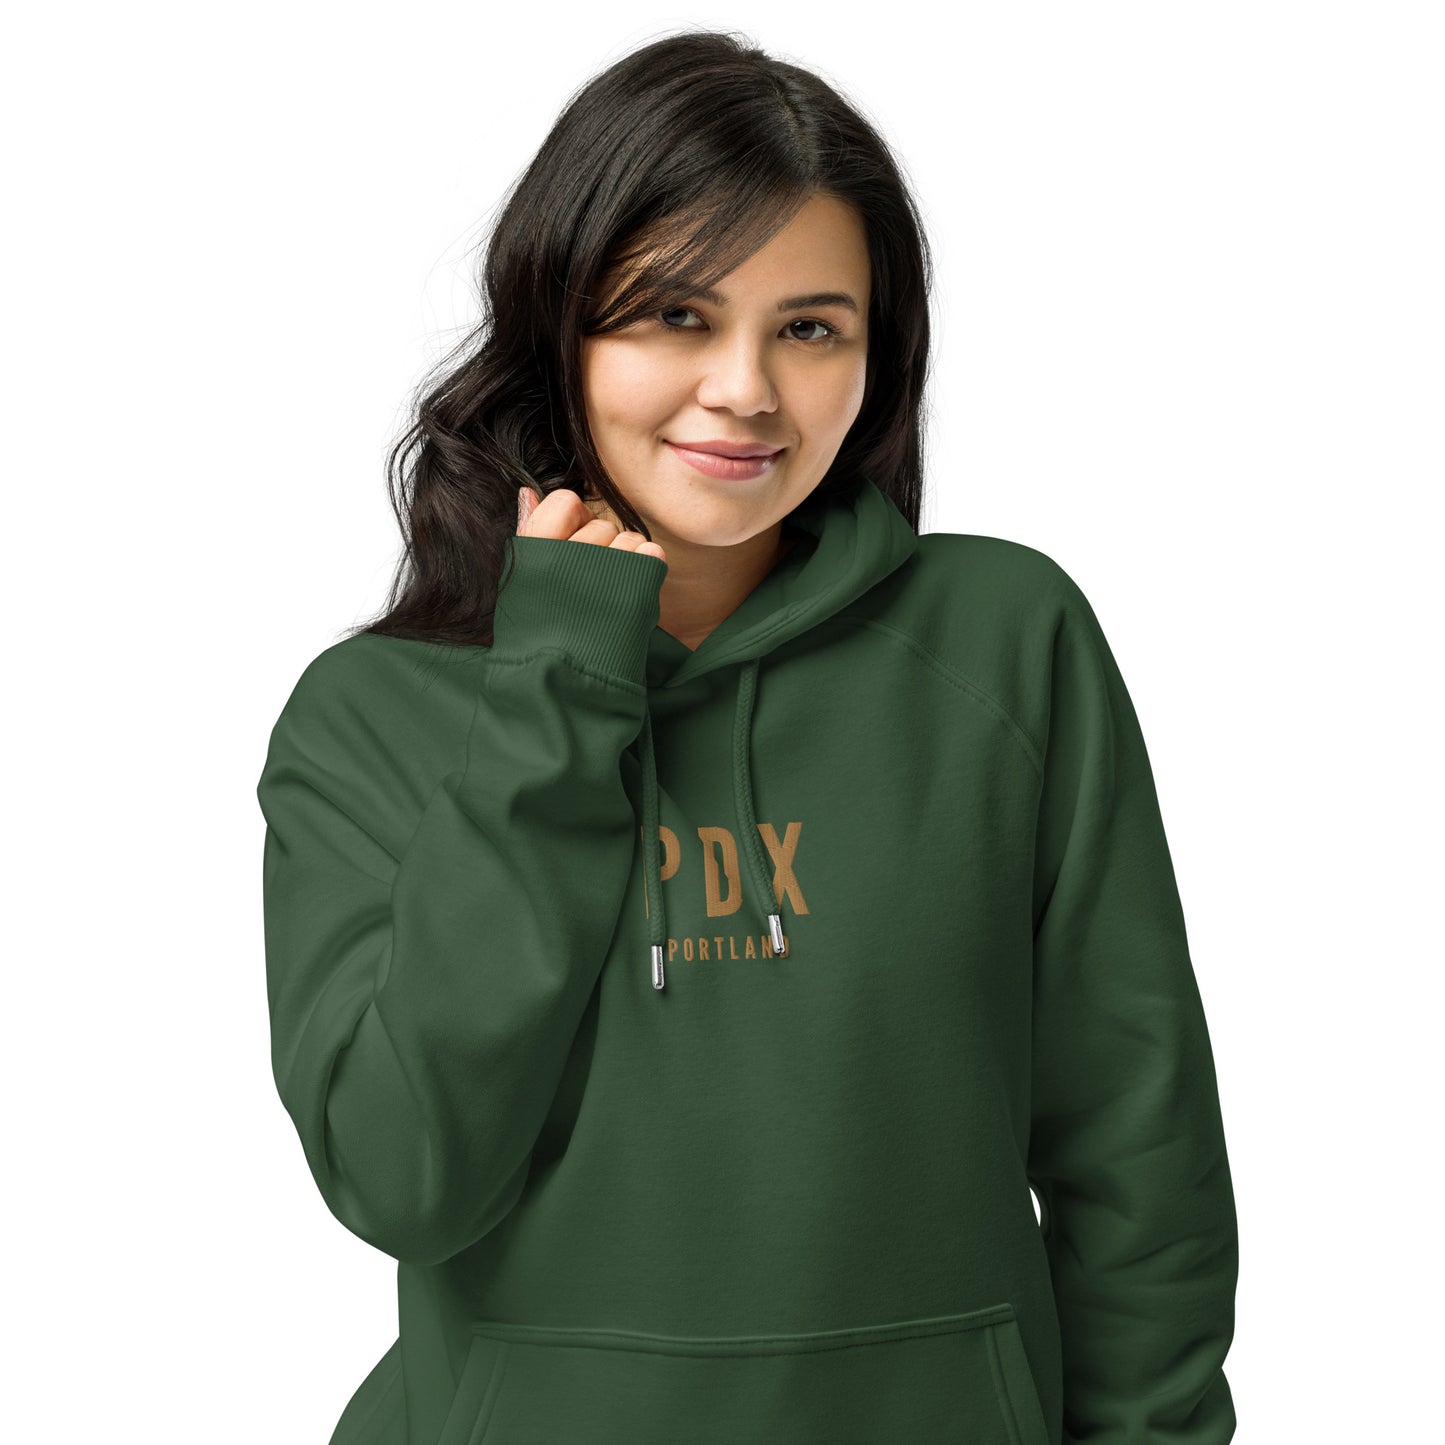 City Organic Hoodie - Old Gold • PDX Portland • YHM Designs - Image 03